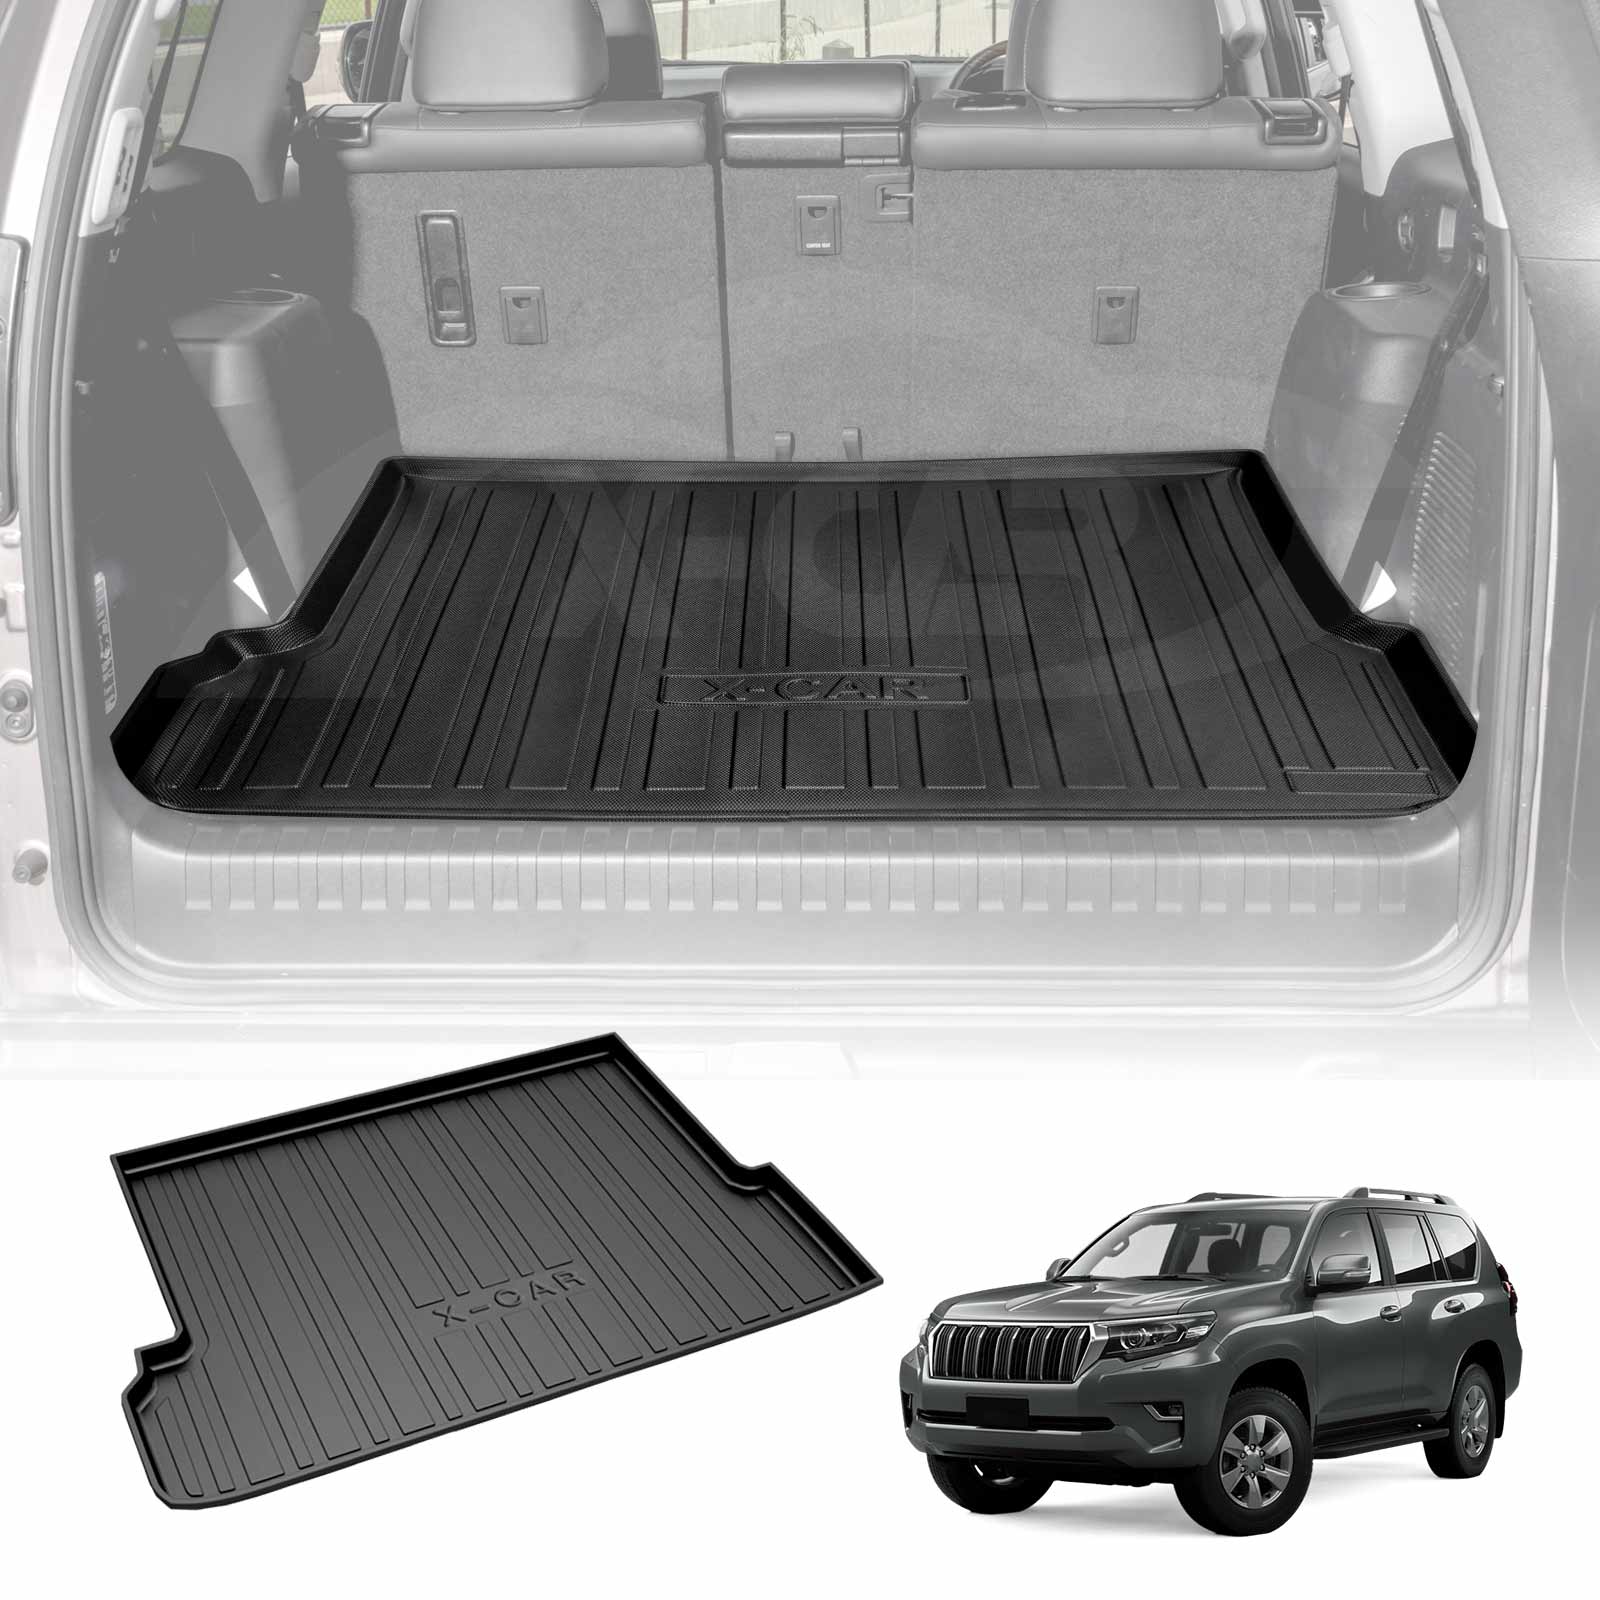 Cargo Rubber Waterproof Mat Boot Liner Cover Luggage Tray for TOYOTA PRADO 150 Series 7 Seater 2009-2023